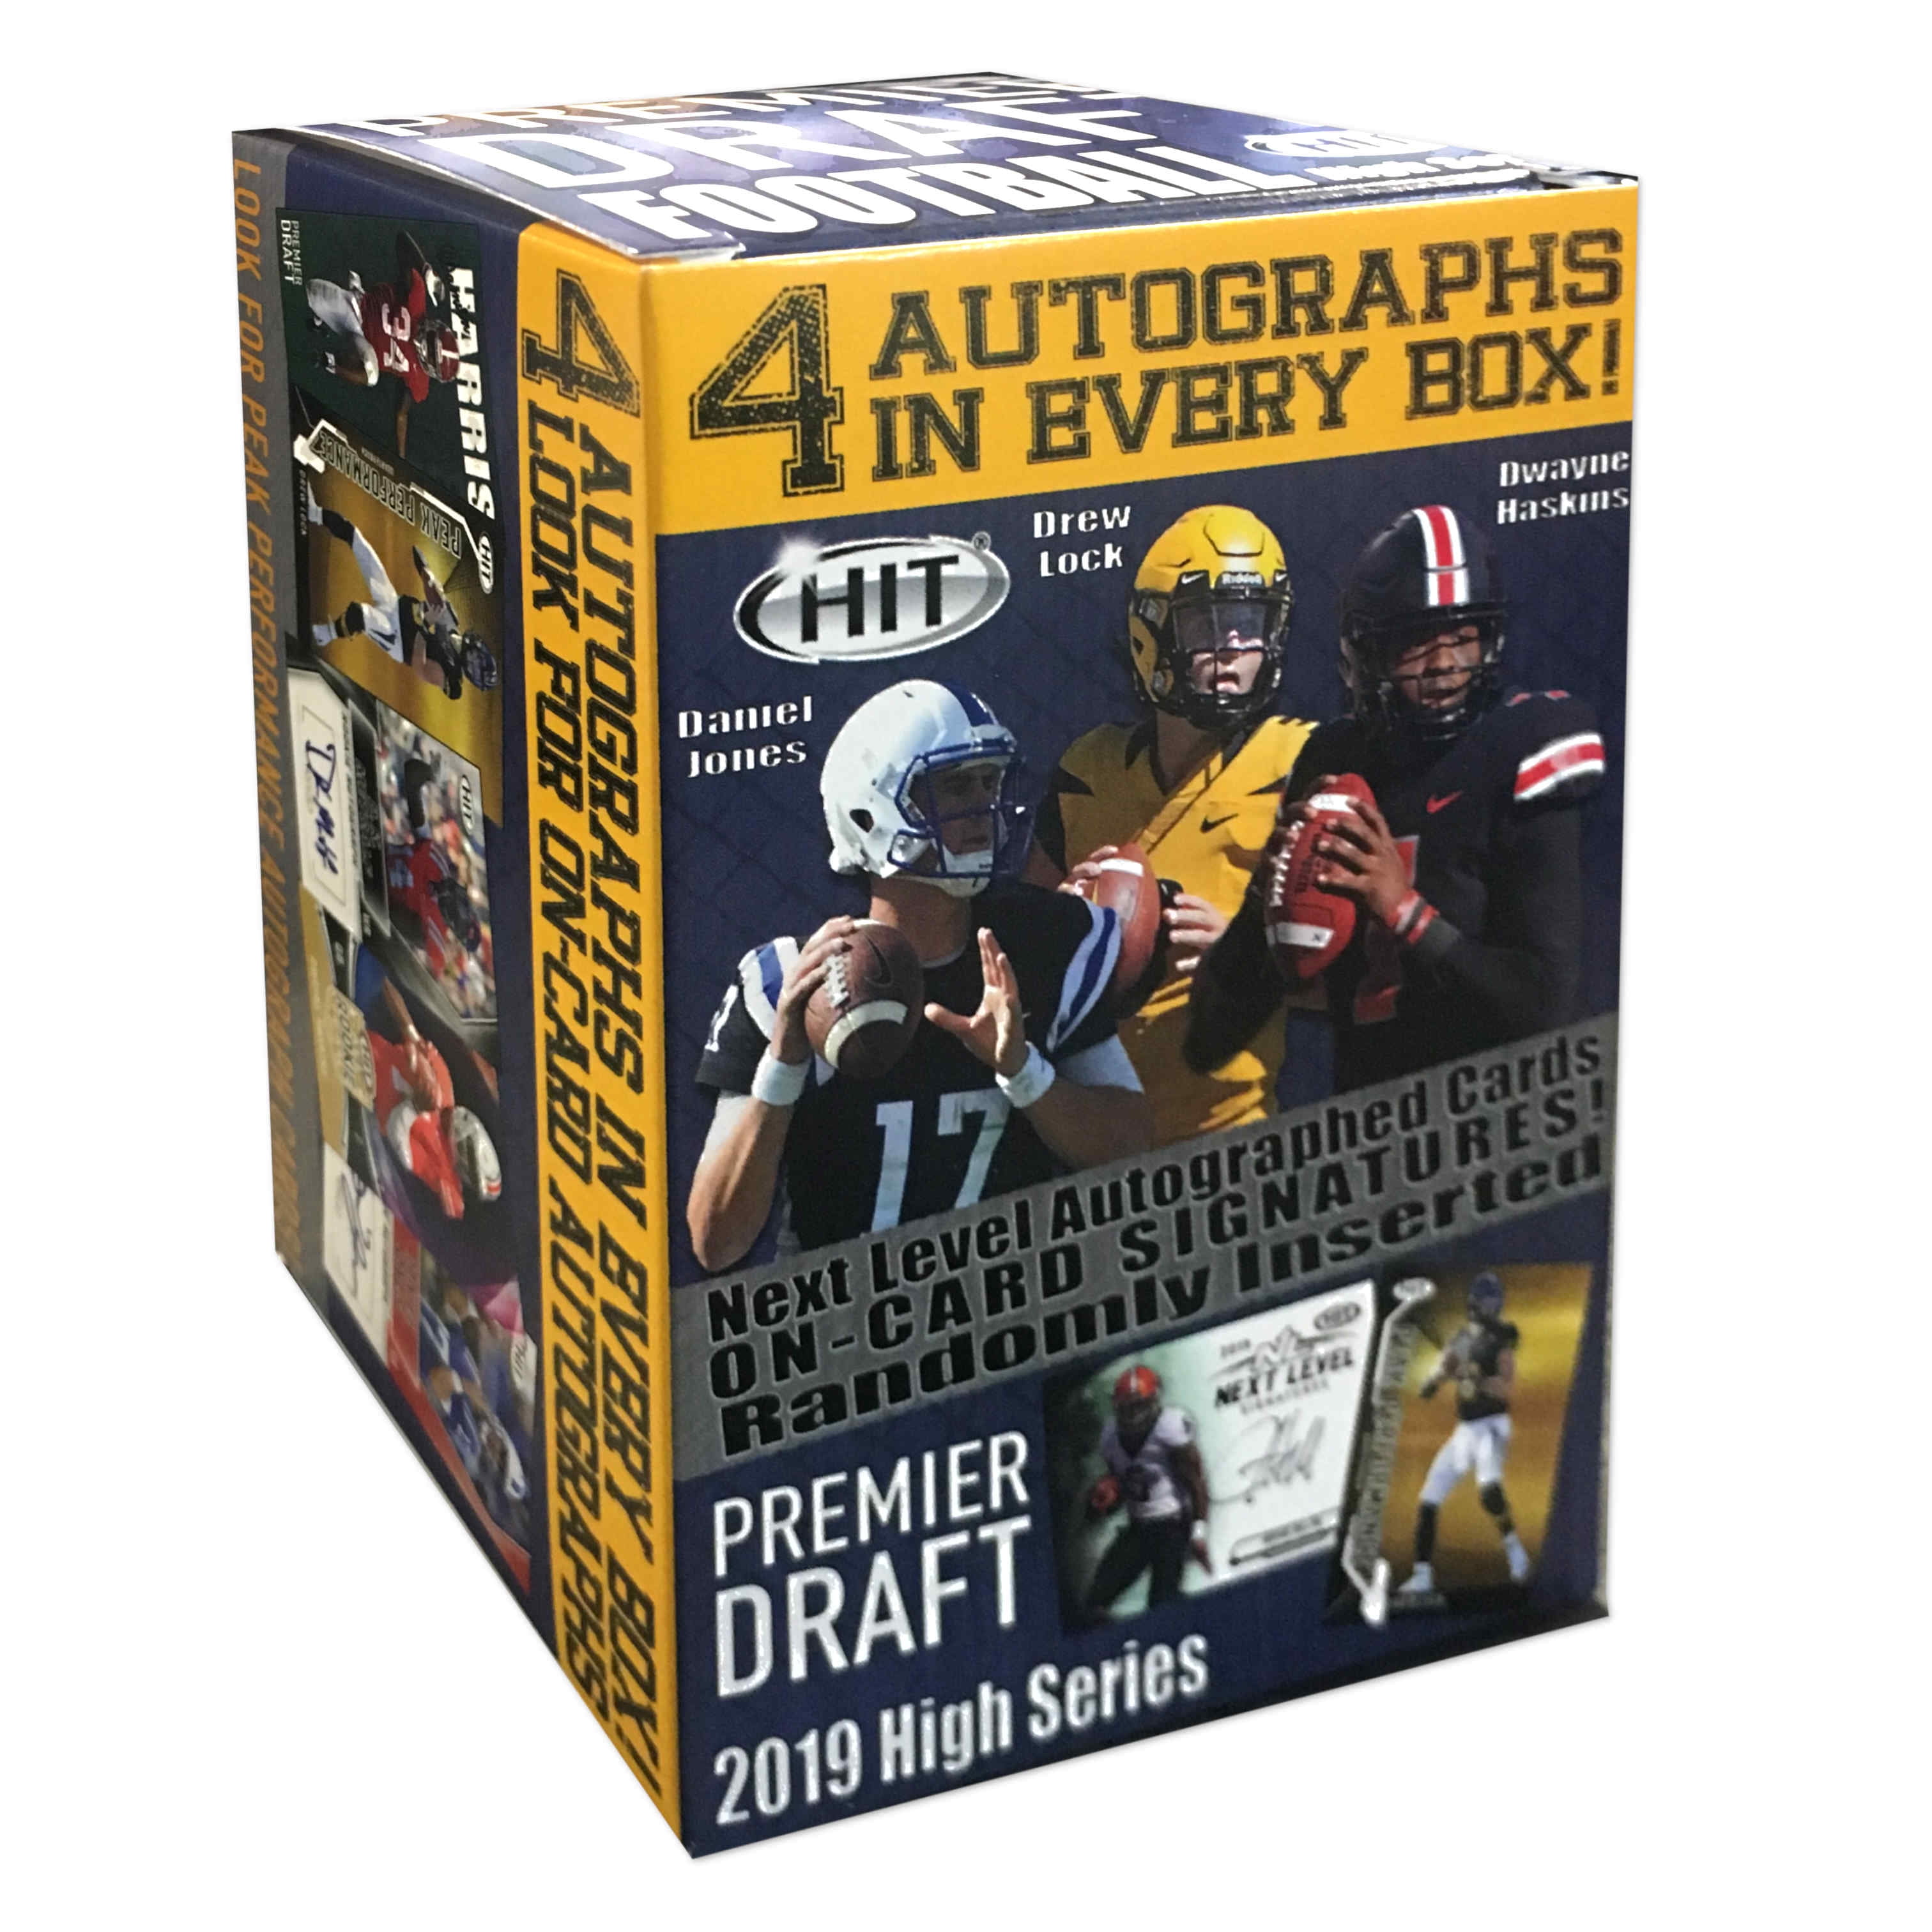 80 cards incl. FOUR Autograph cards 2019 SAGE Hit High Series Football BLASTER box